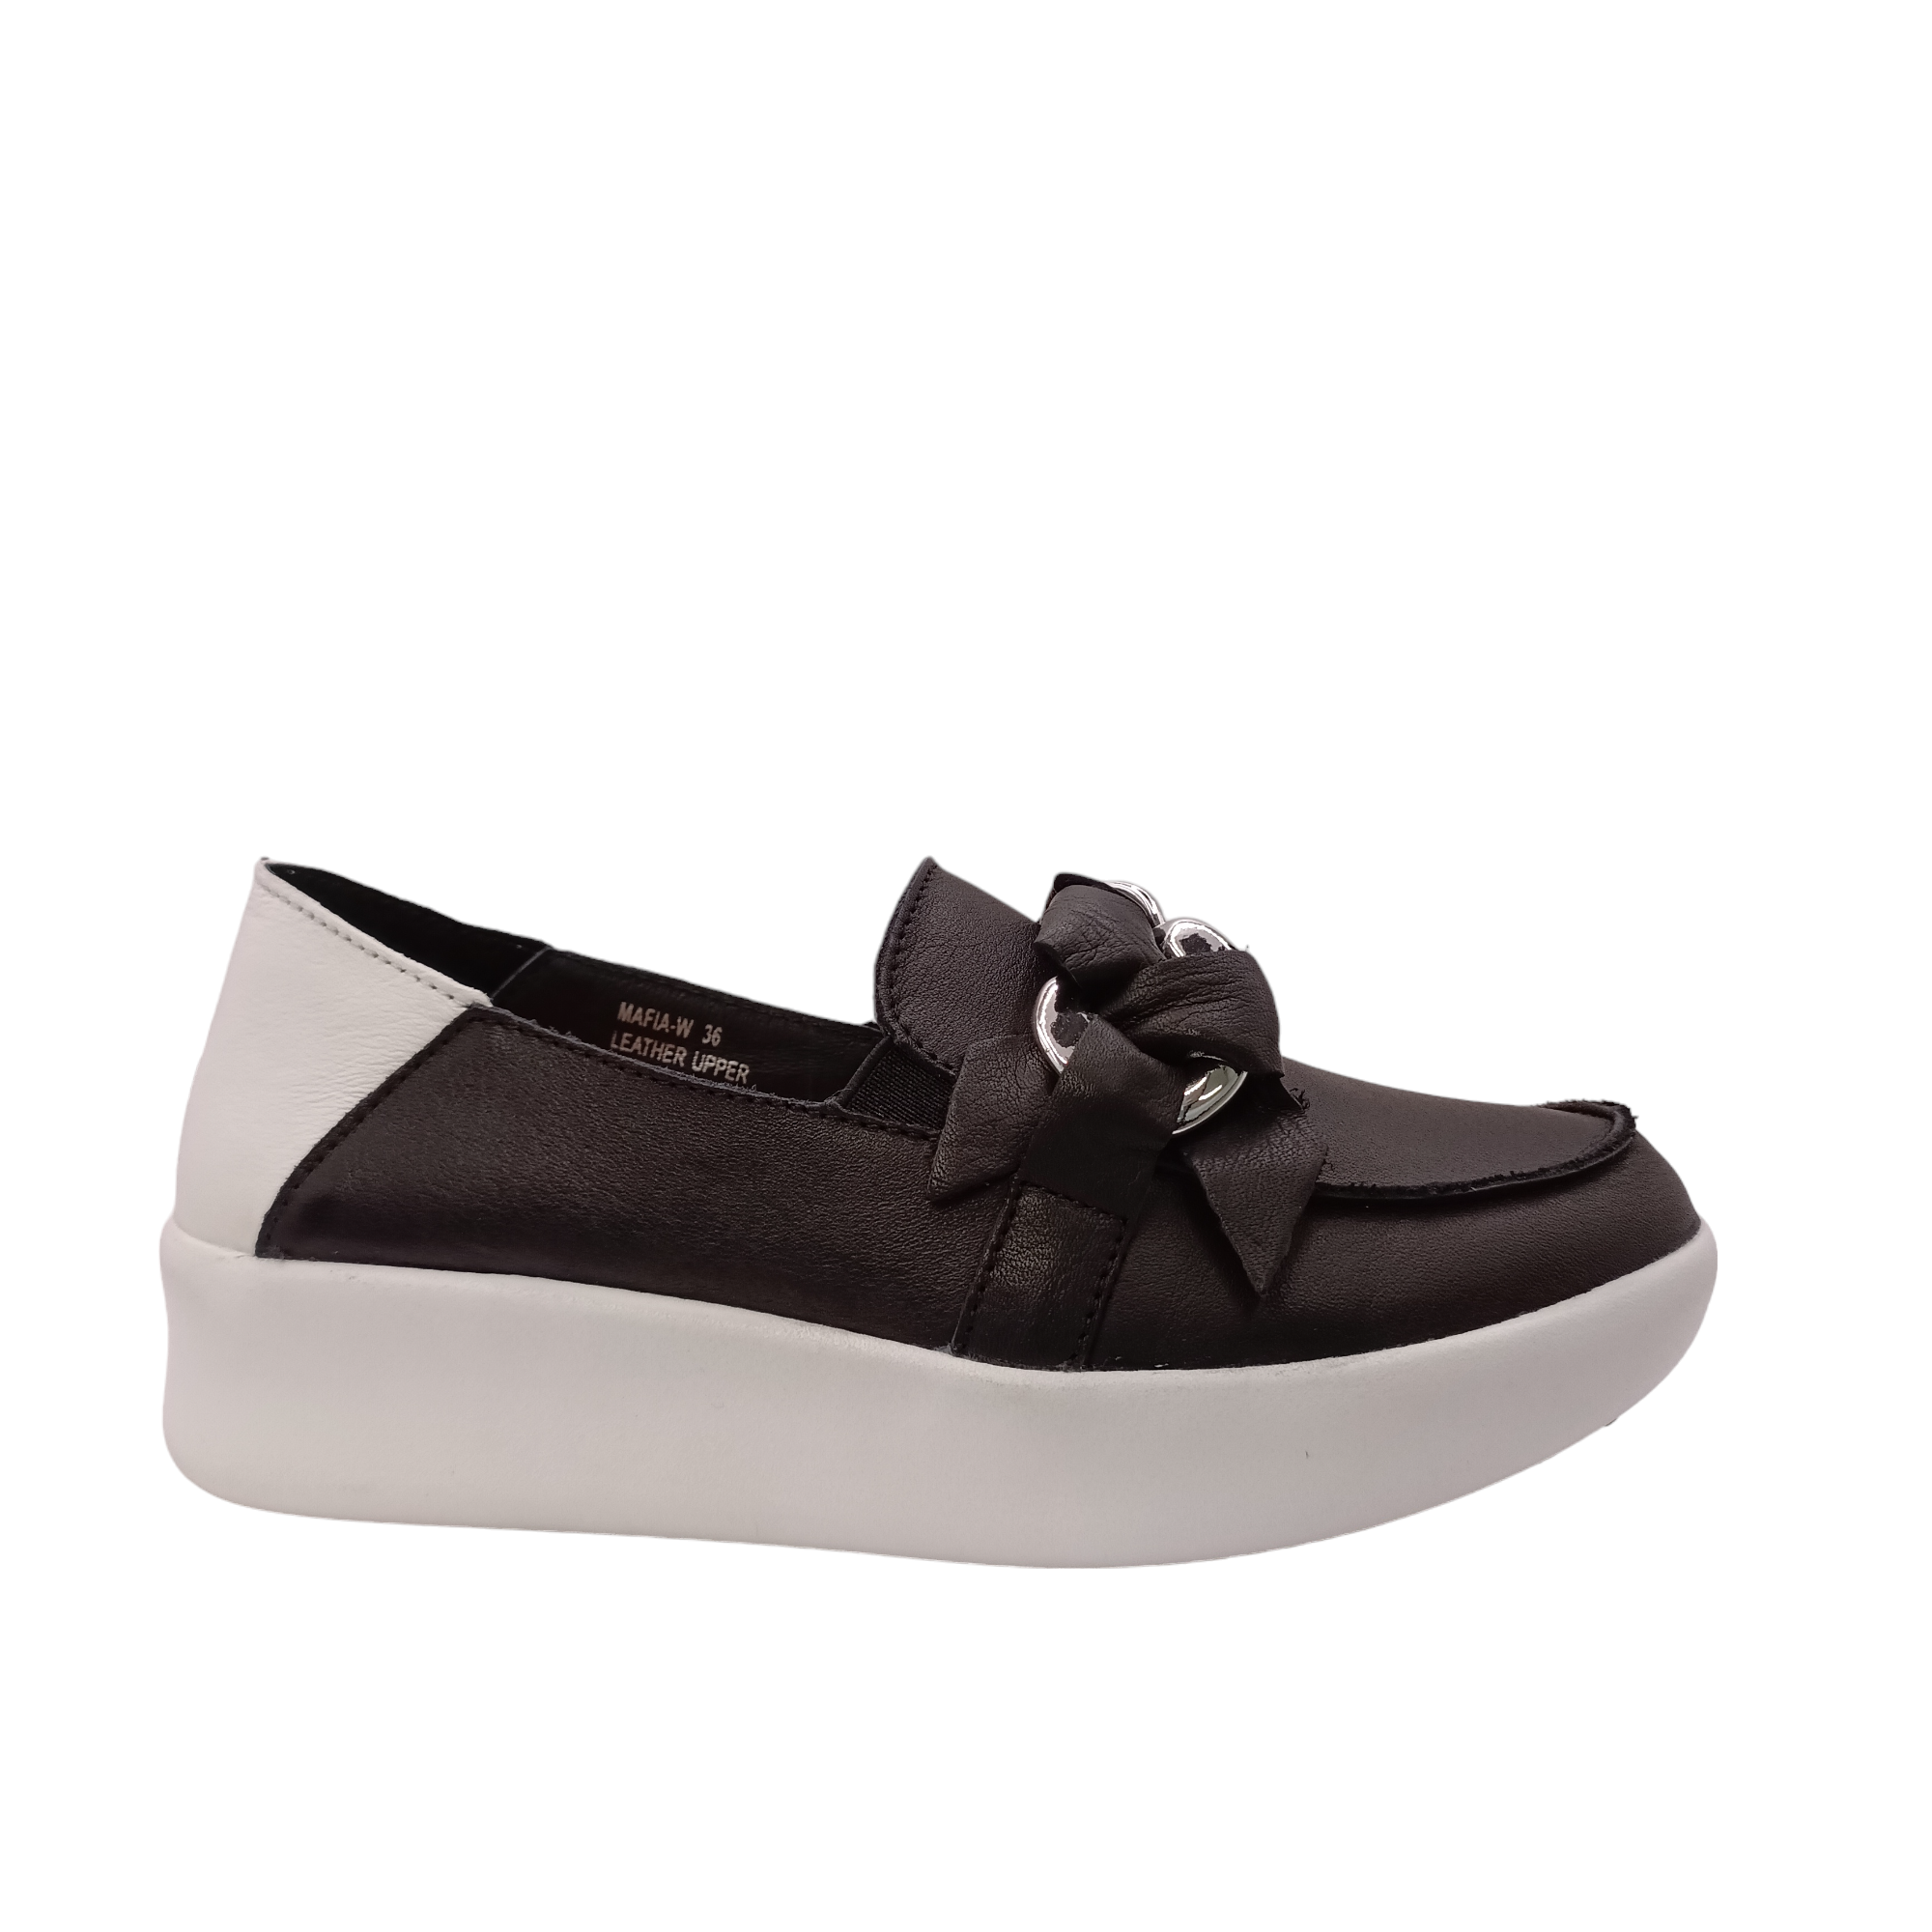 Side angled view of black slip on shoe called mafia from Alfie & Evie. Black leather laced in silver chain decorating the top, white leather heel with a white sole. Shop Alfie & Evie Womens Shoes online and In-Store with shoe&me Mount Maunganui.